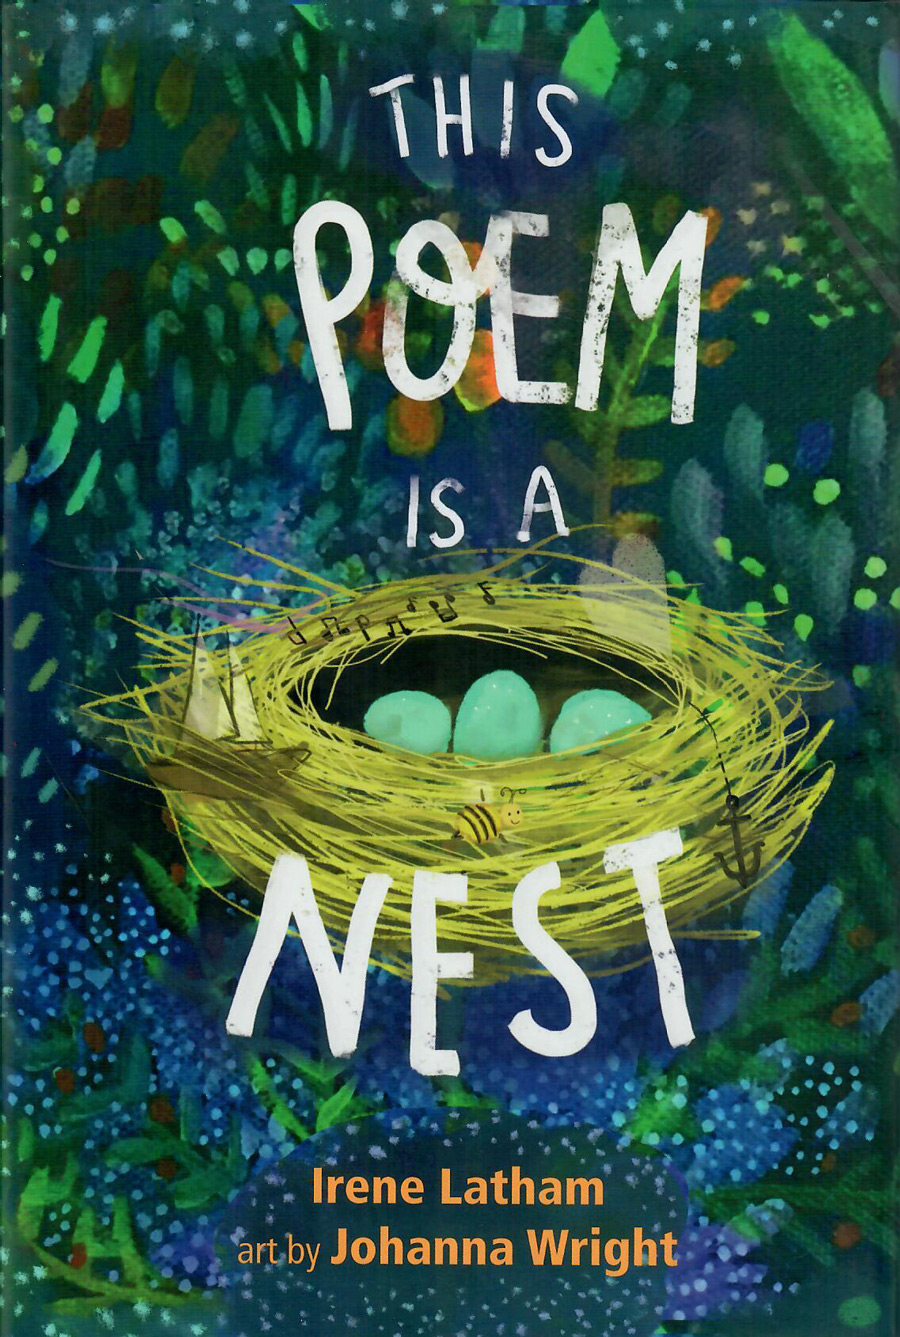 Book jacket of This Poem is a Nest by Irene Latham